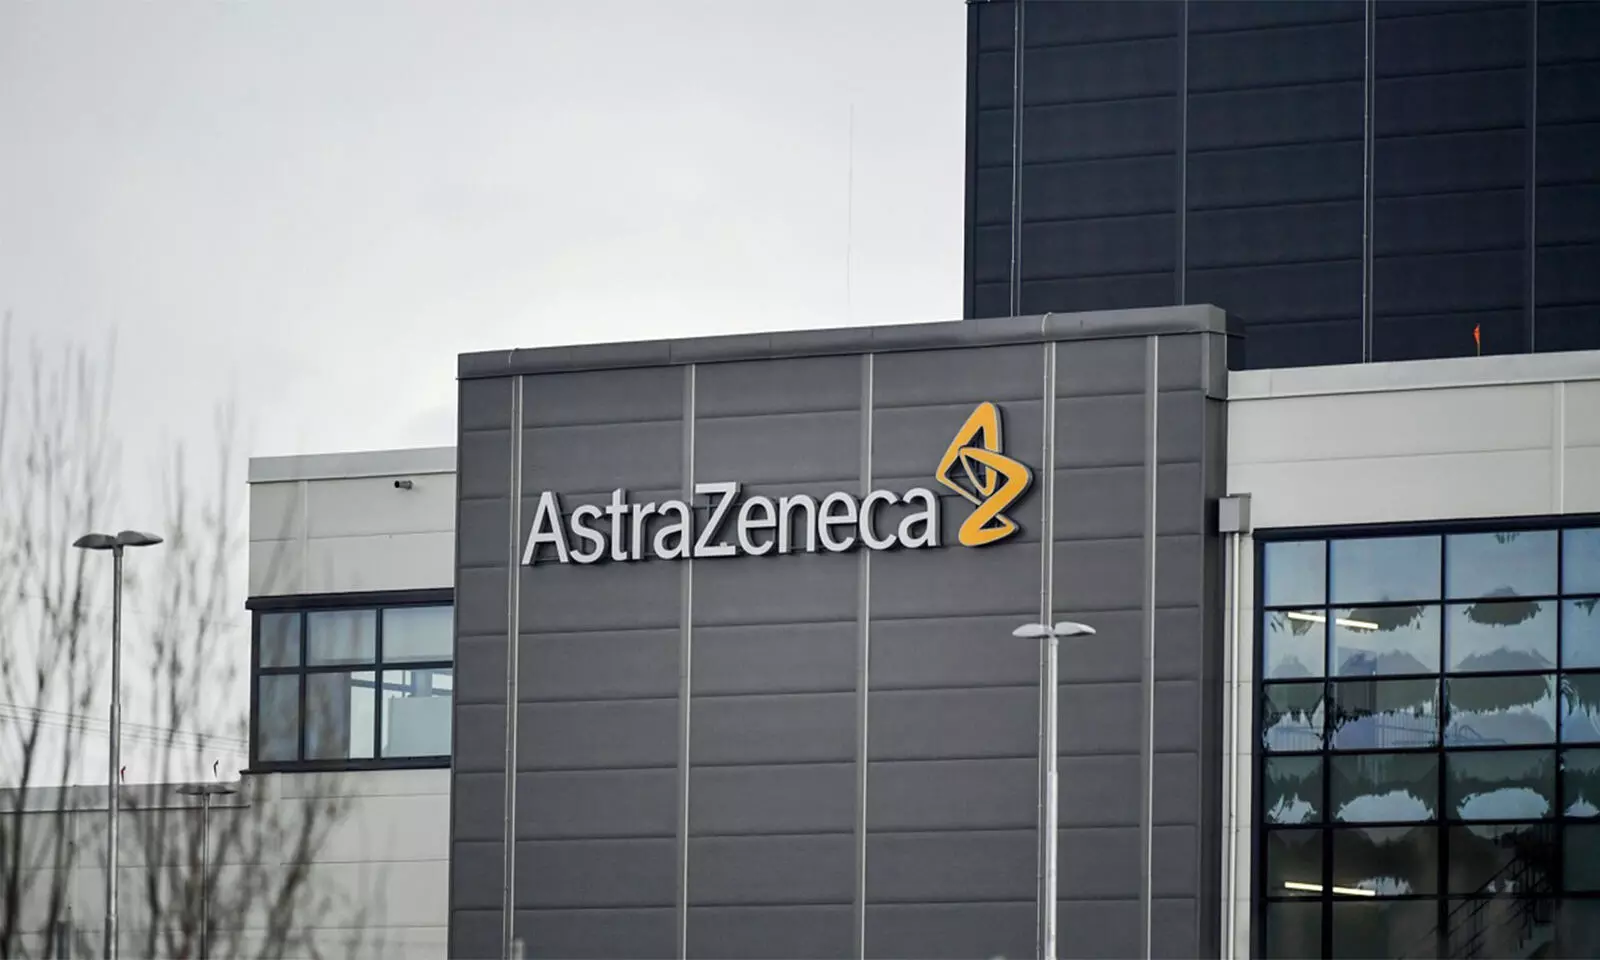 AstraZeneca, Hutchmed begin phase 3 trial of Orpathys, Tagrisso combo in lung cancer patients